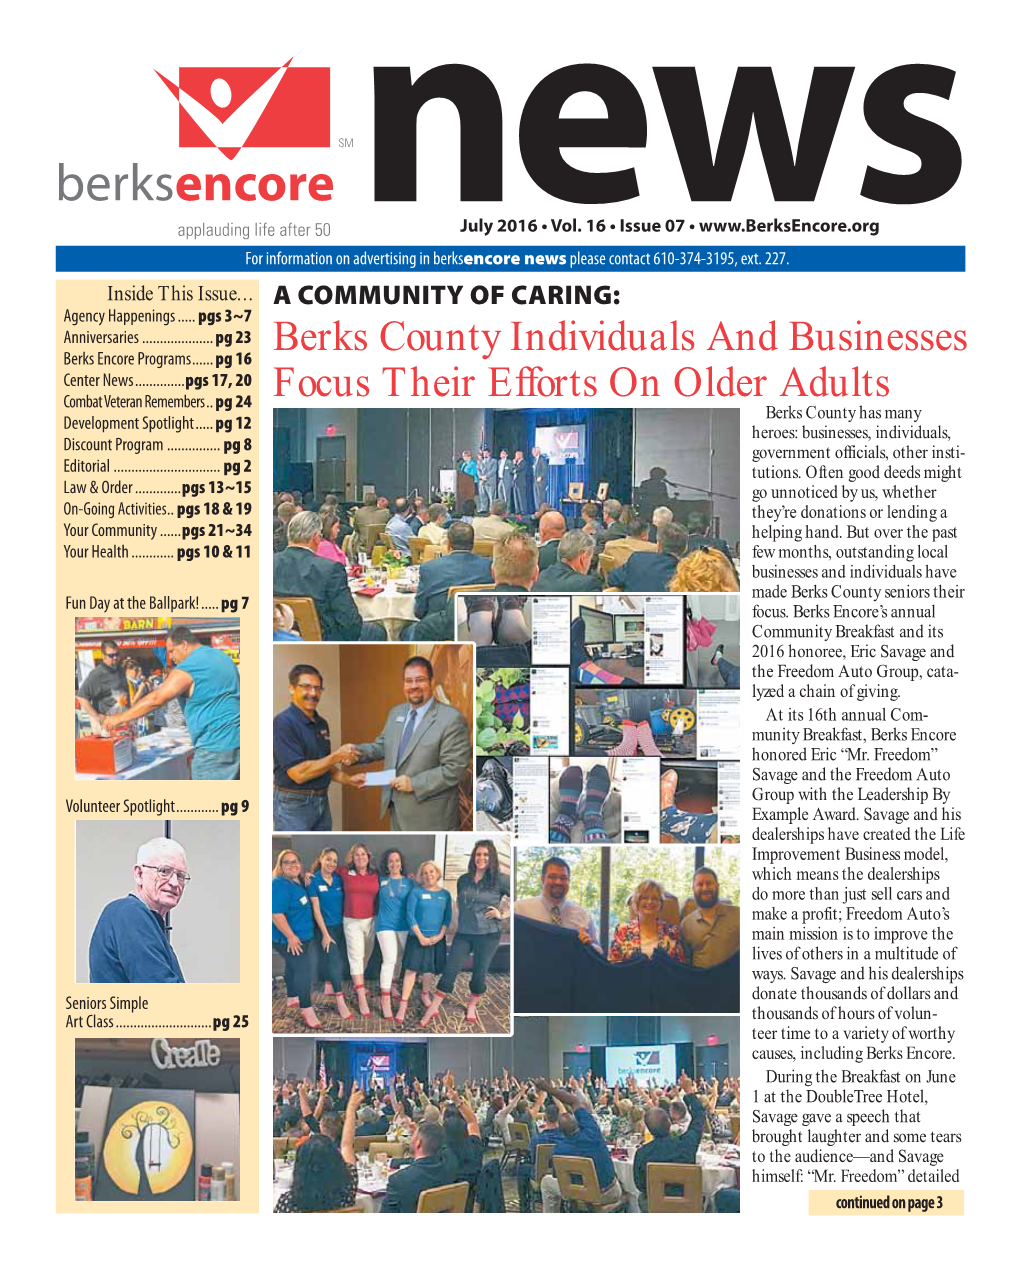 Berks County Individuals and Businesses Focus Their Efforts On